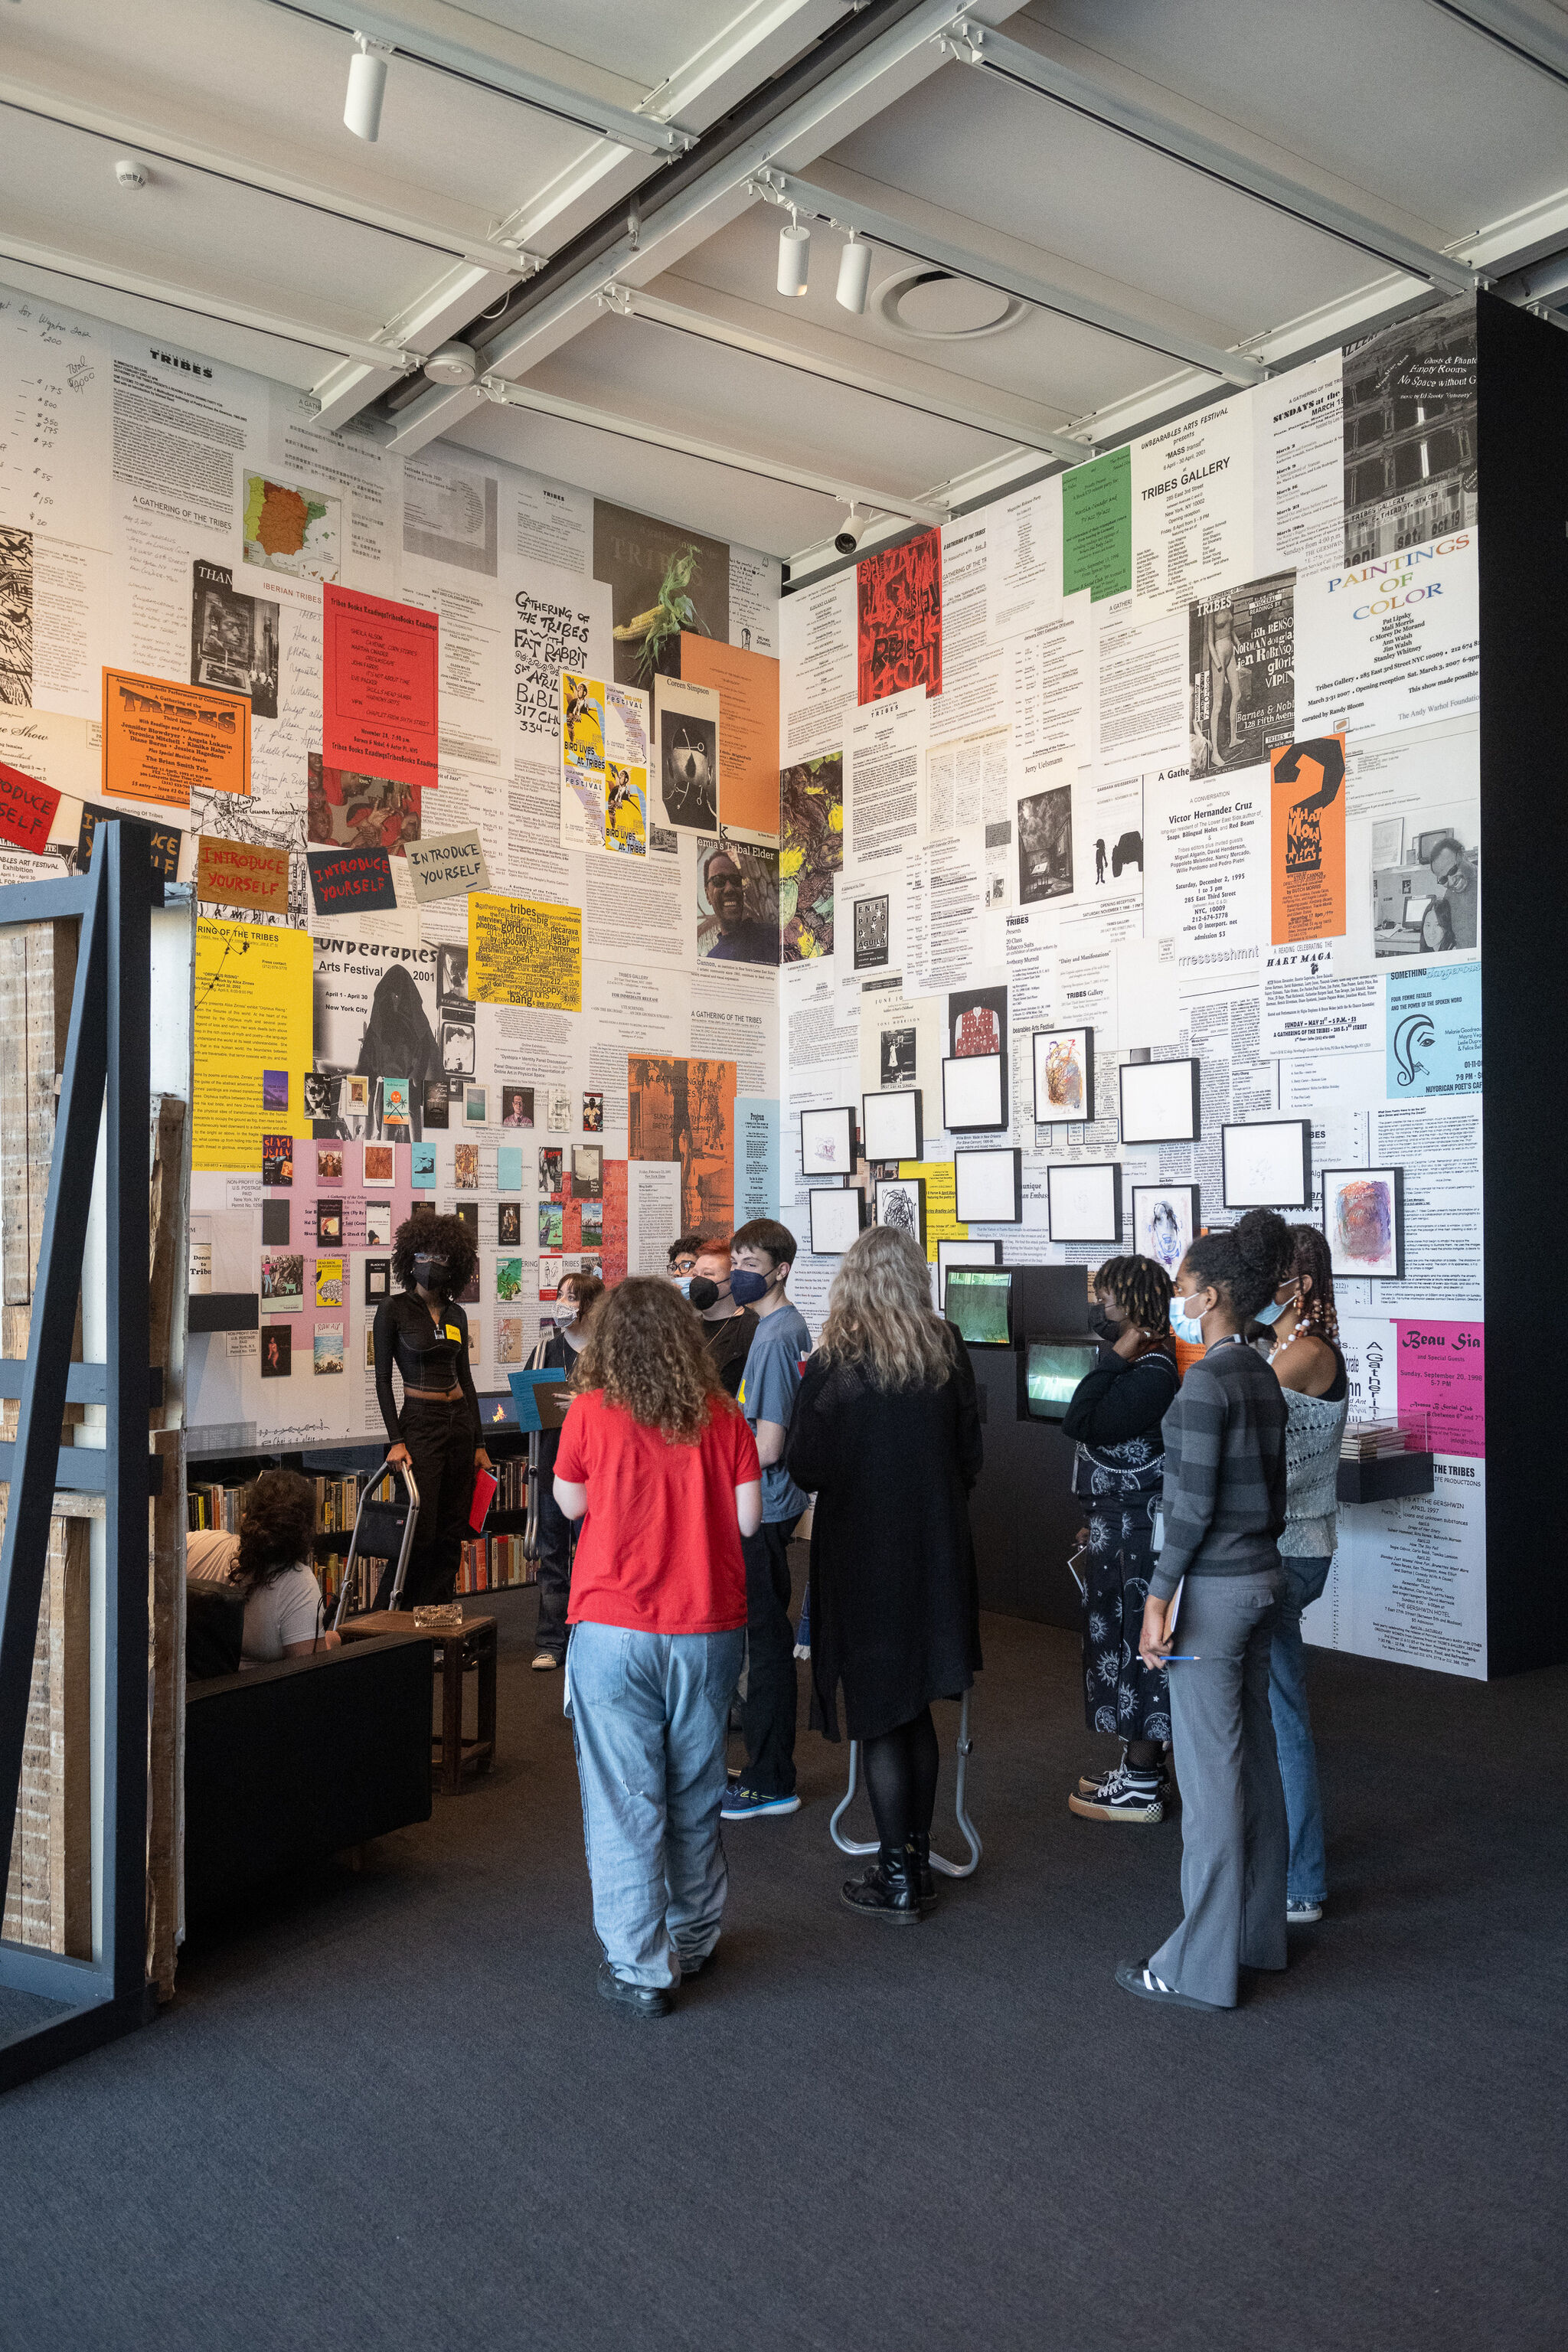 A group of teen visitors stand in front of an installation comprised of two walls collaged with various paper materials and pieces.